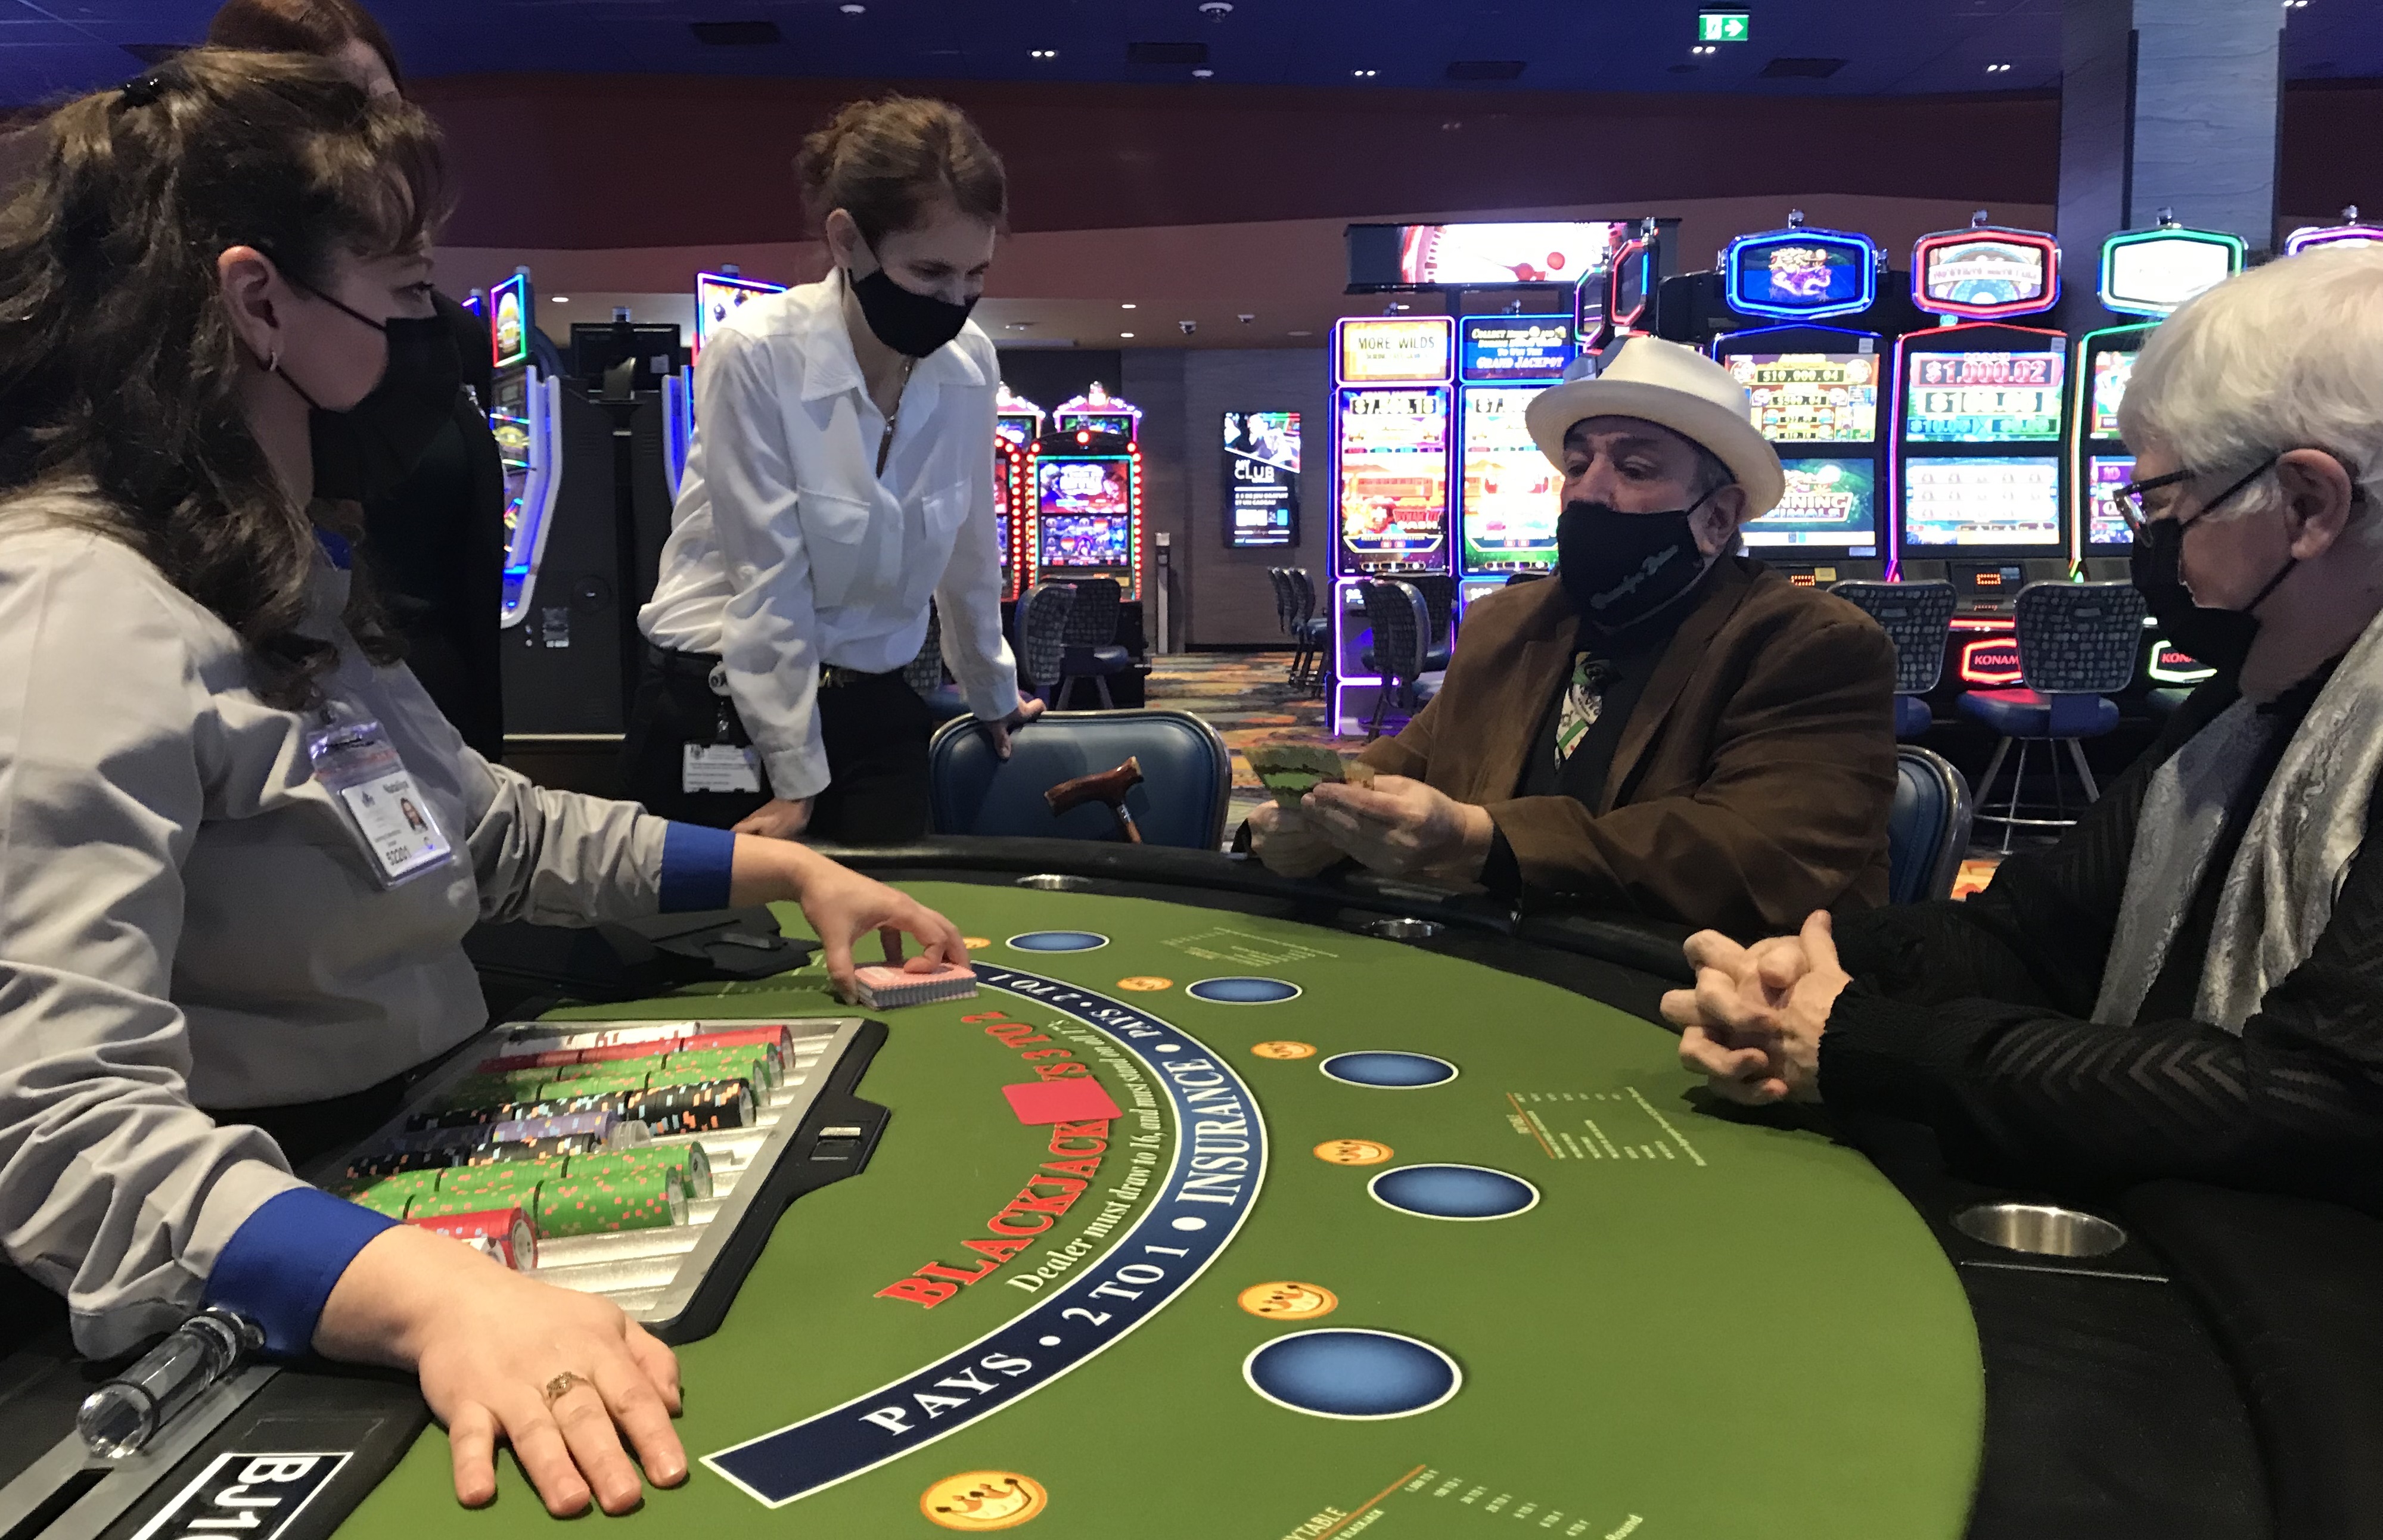 Casino super fan takes first card at Cascades - North Bay News